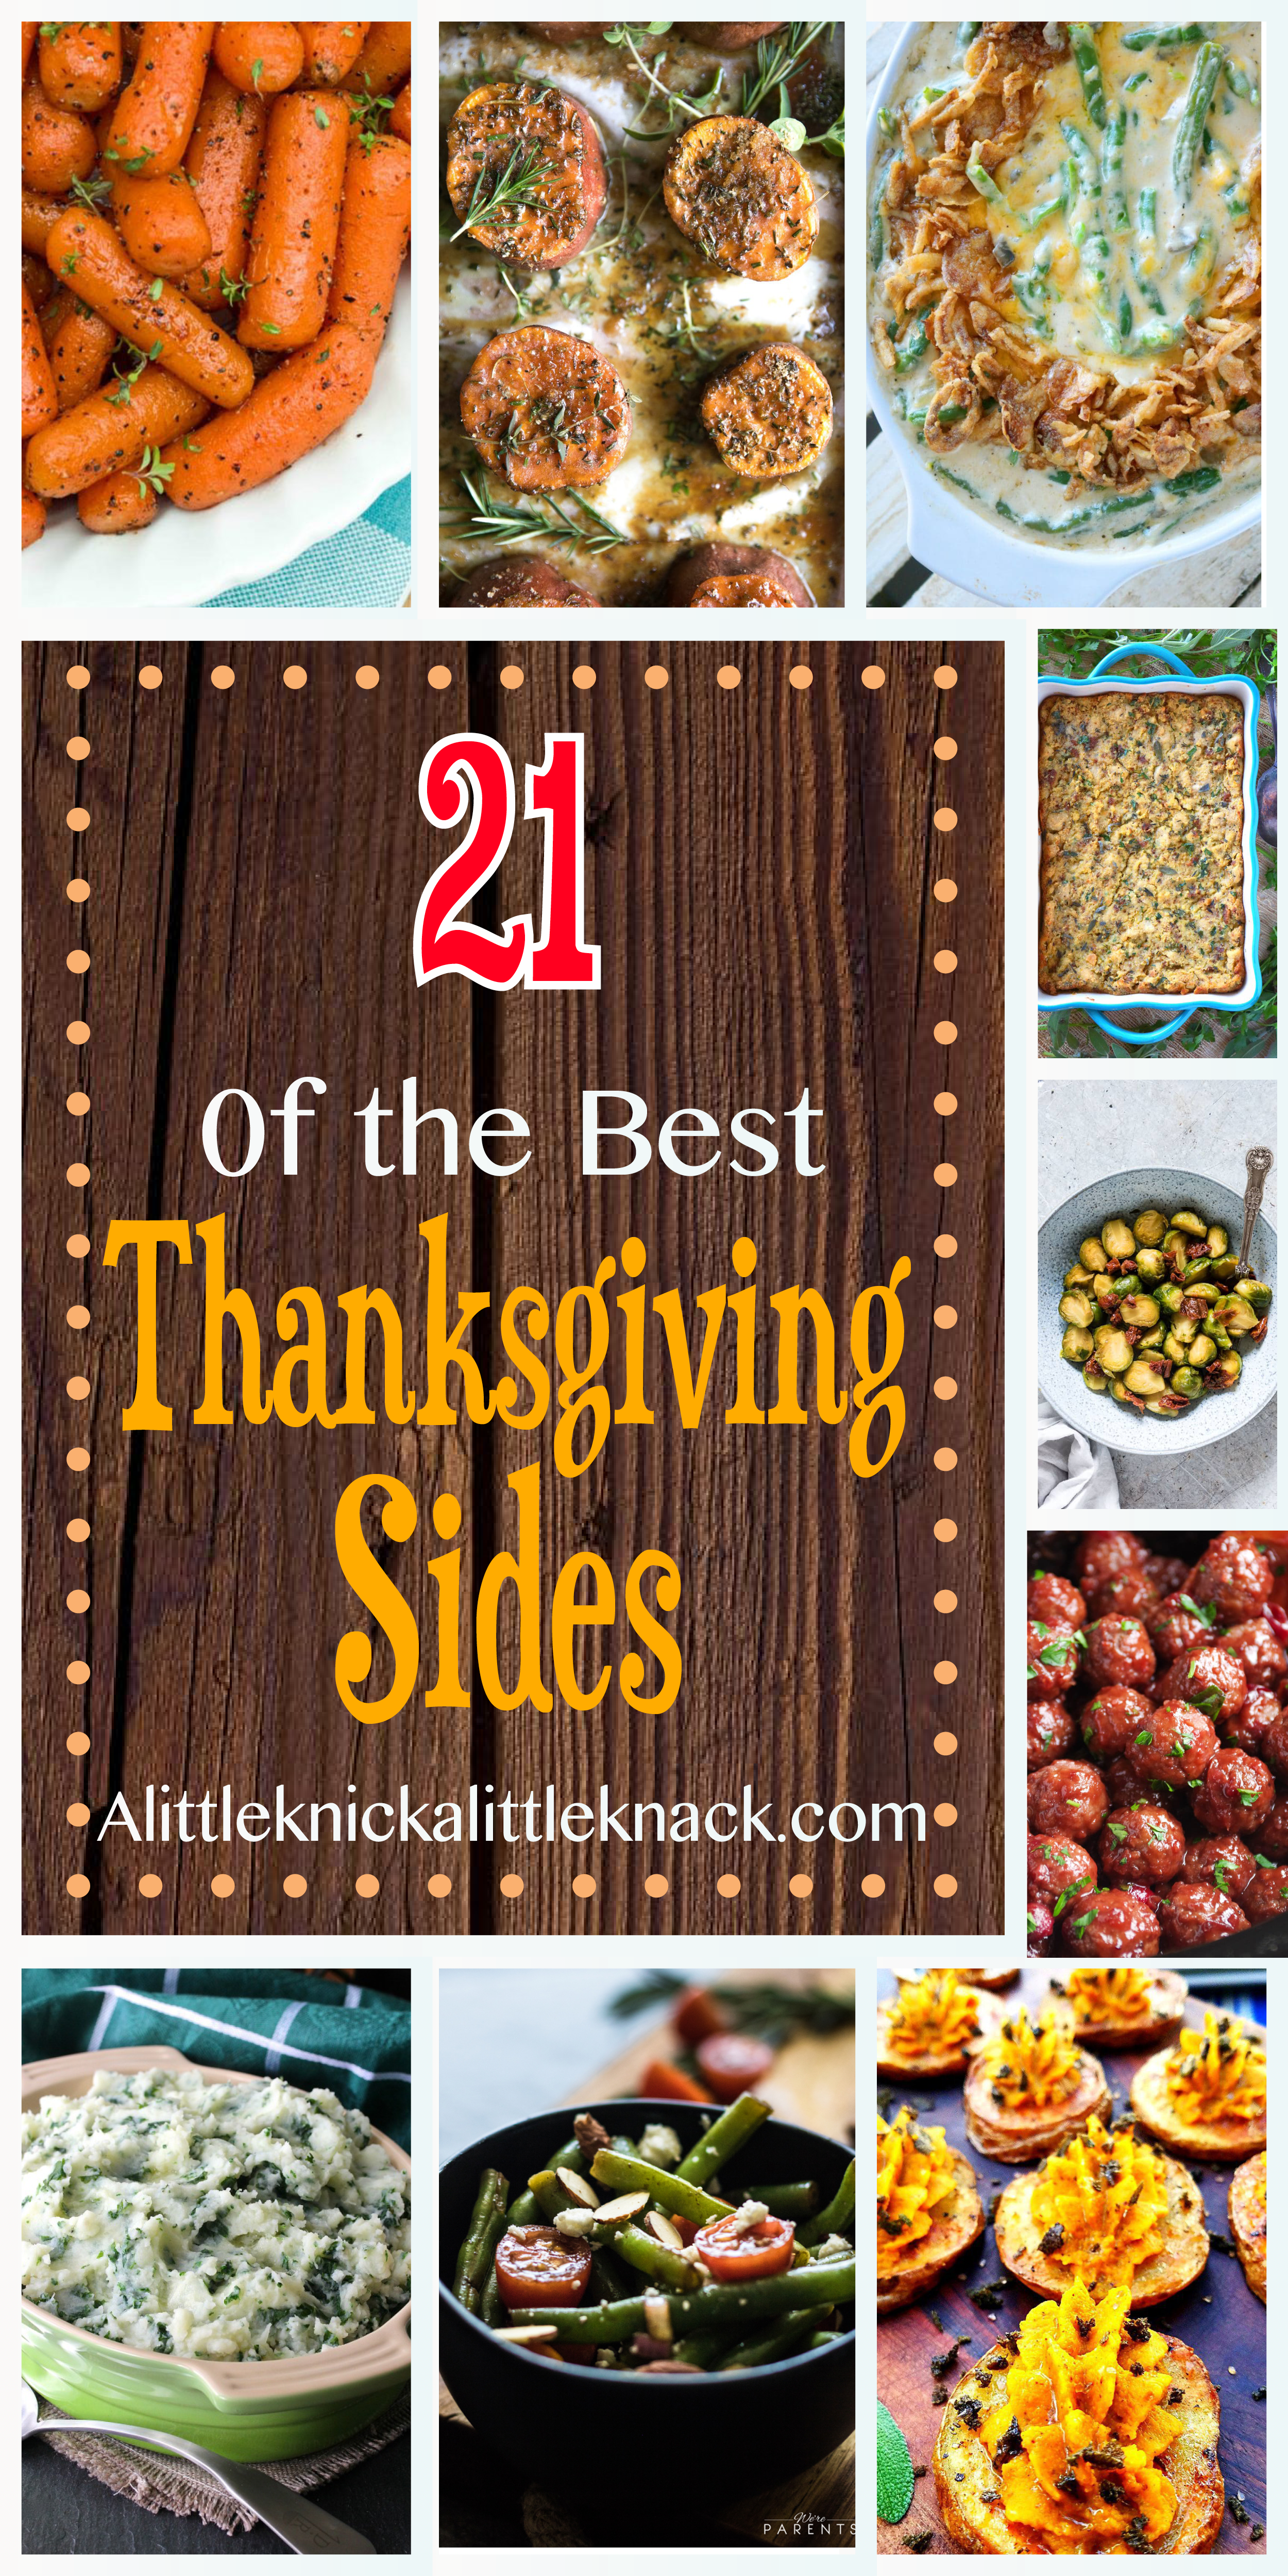 21 crowd pleasing Thanksgiving sides guaranteed to win your mother-in-law over! #thanksgiving